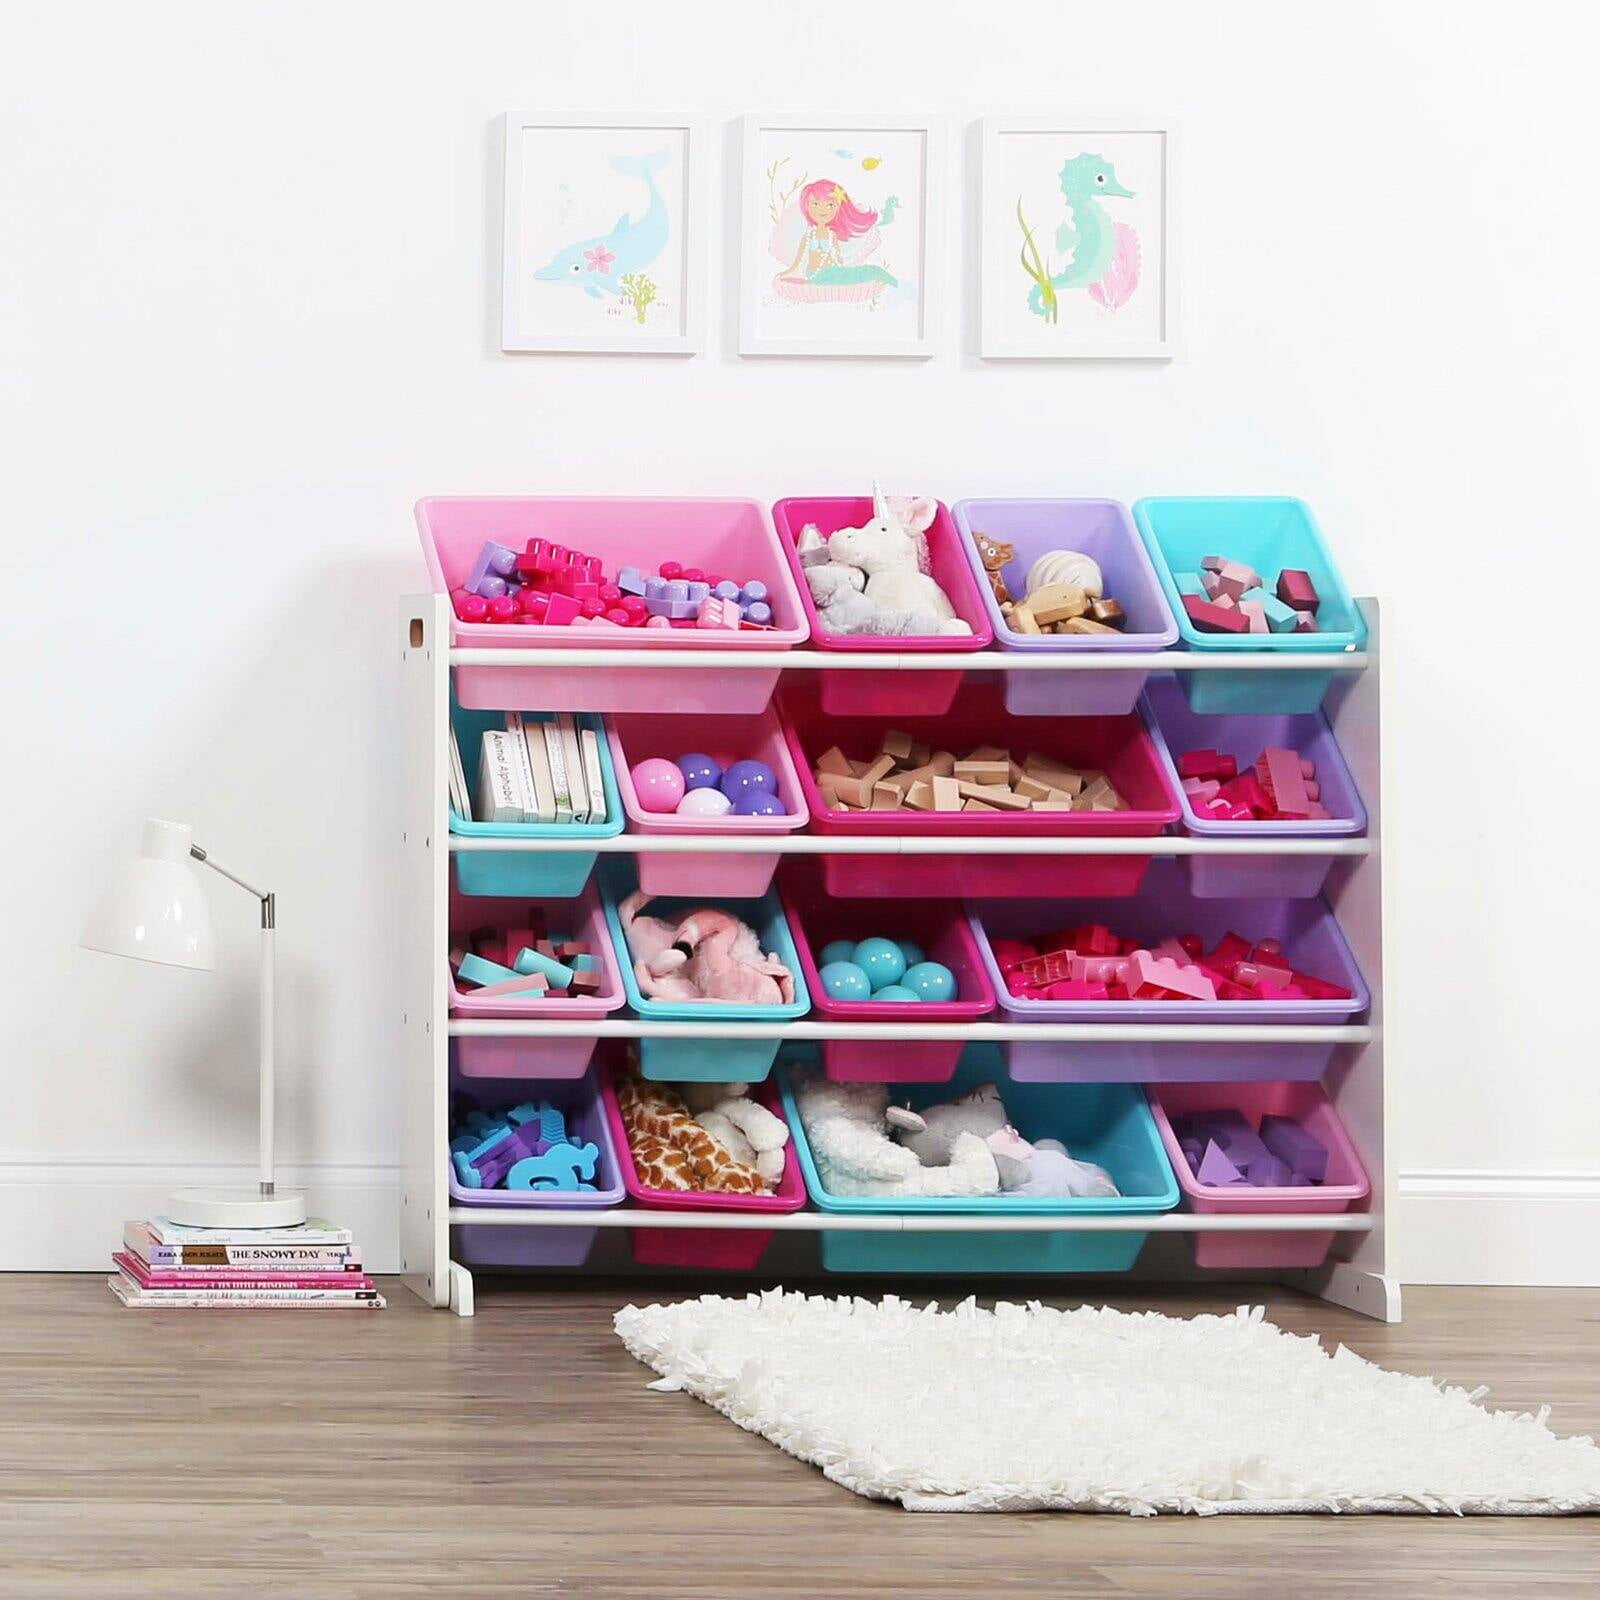 EPBOT: 10 Clever Ways To Display Your Plush Toys - That Don't Include  Shelves! - For Kids AND Collectors